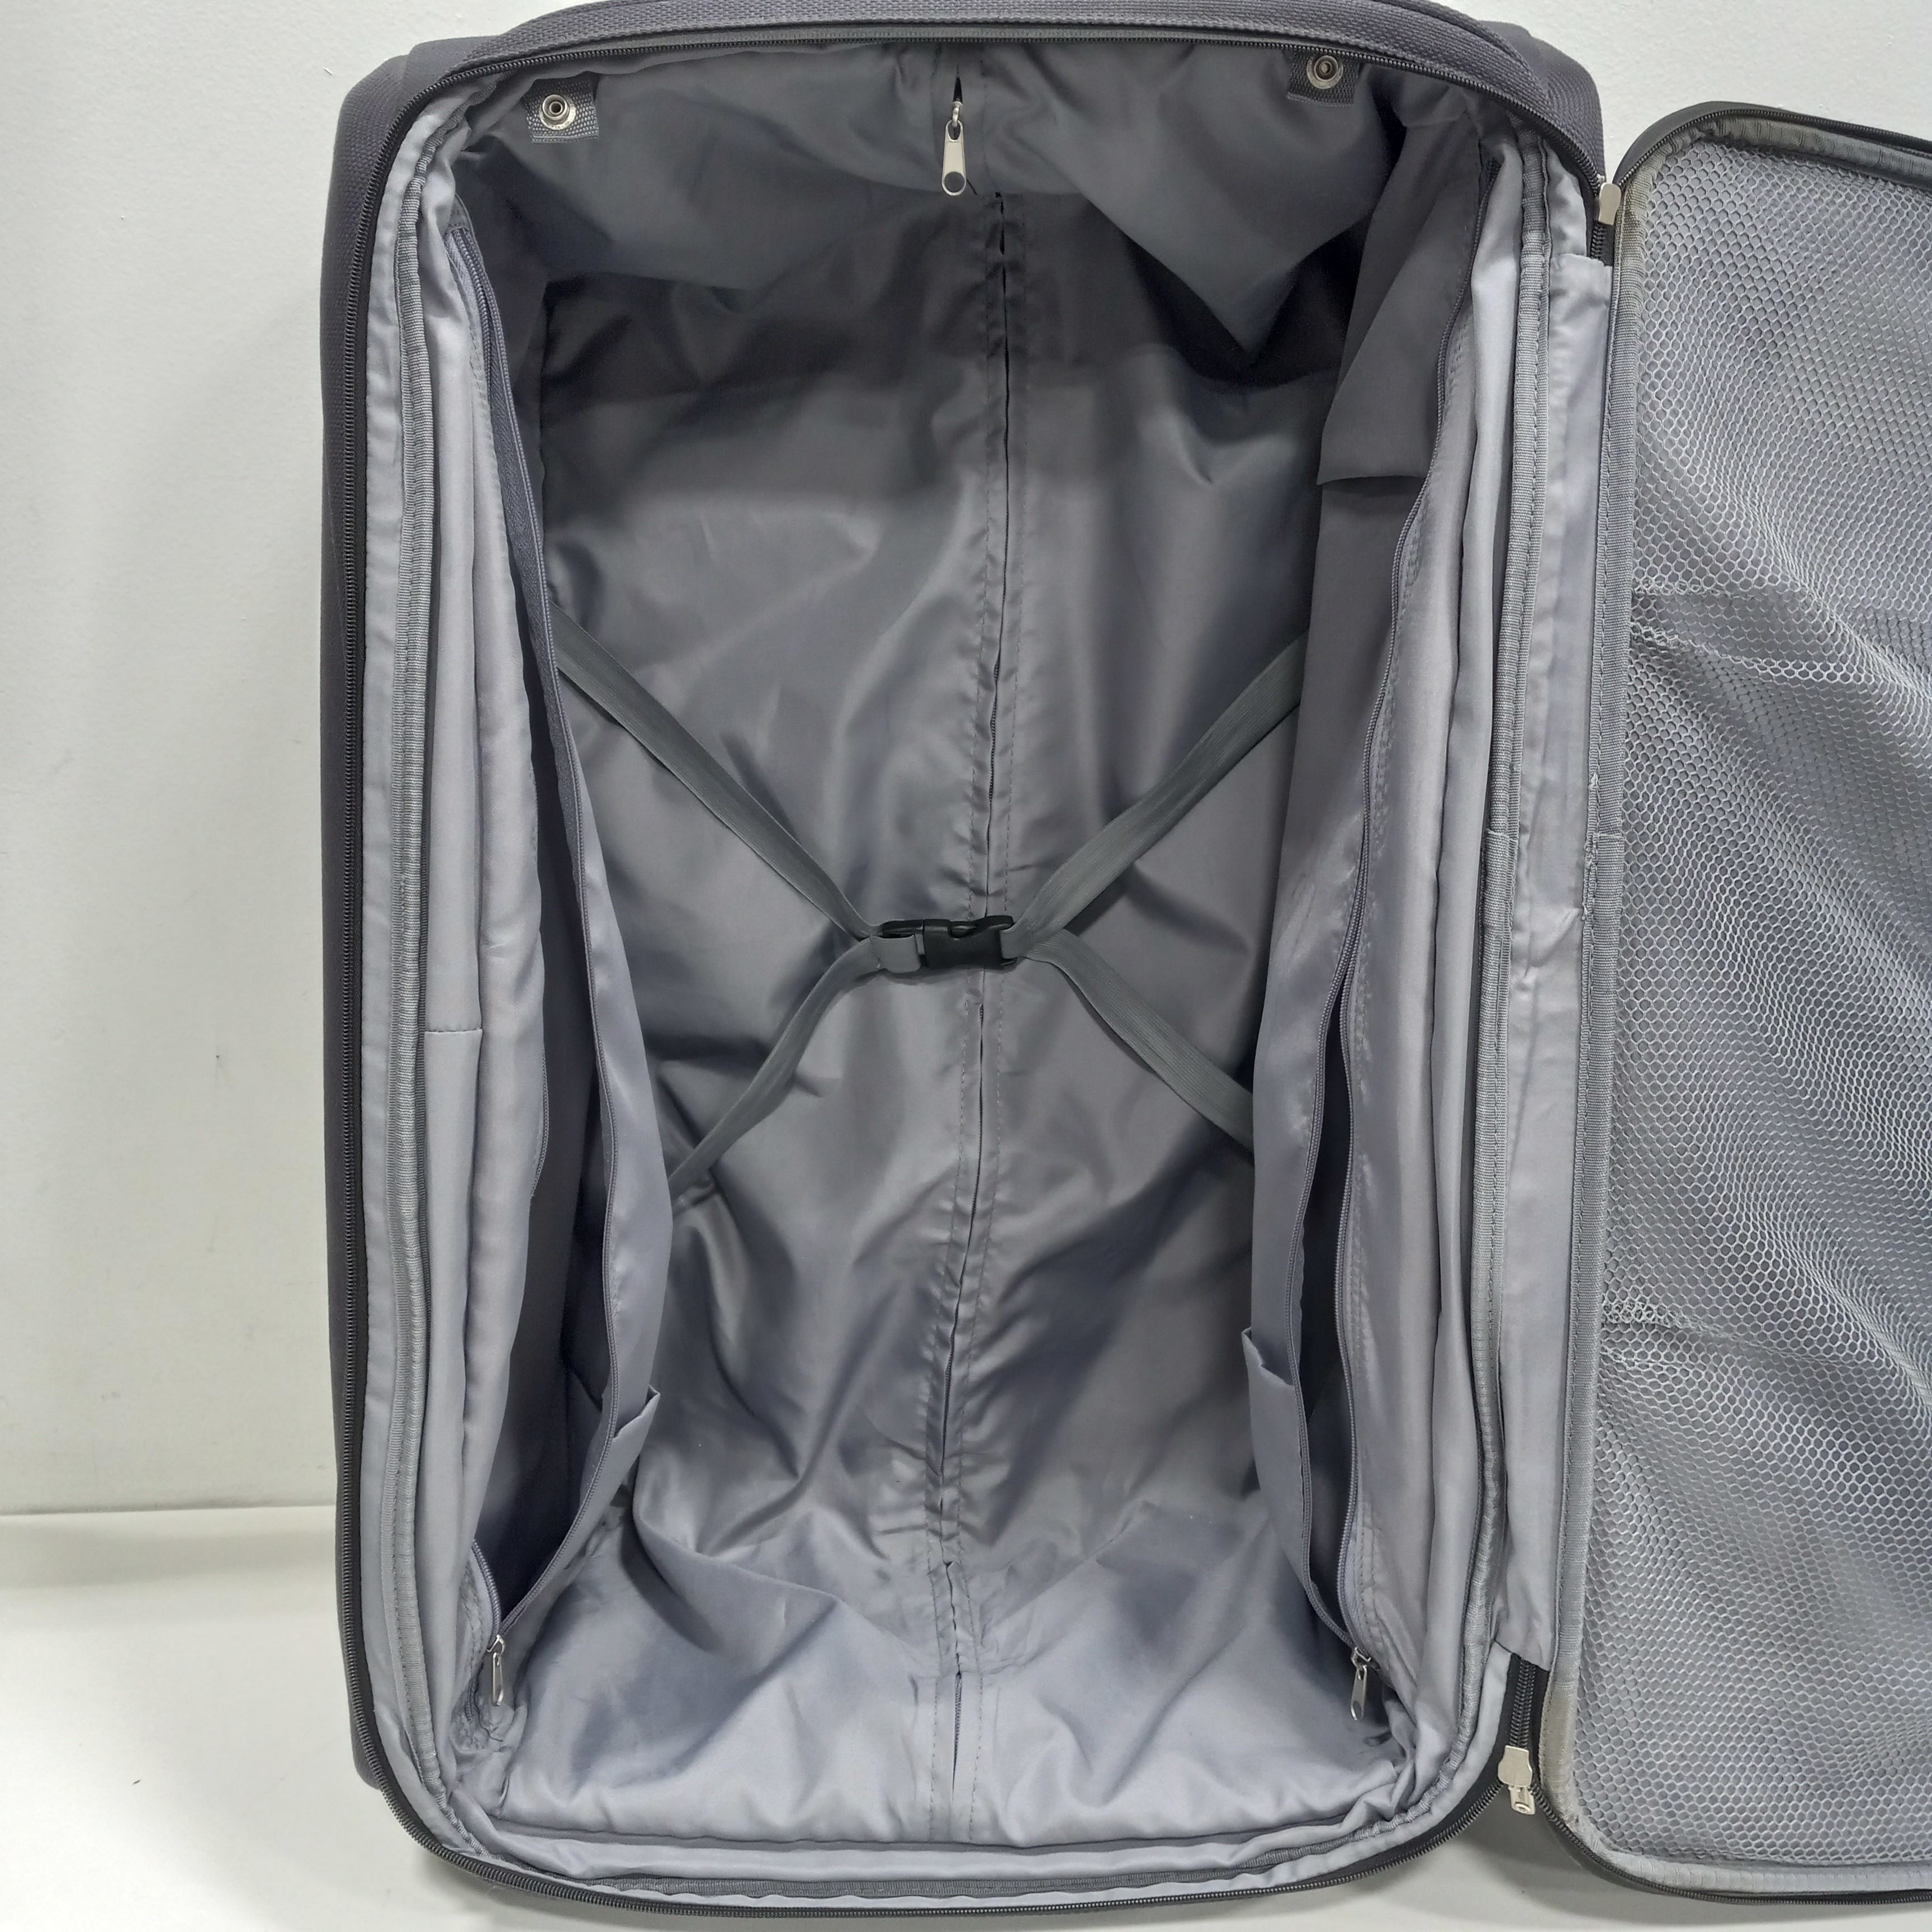 Buy the Worldbound Charcoal & Black Rolling Luggage | GoodwillFinds